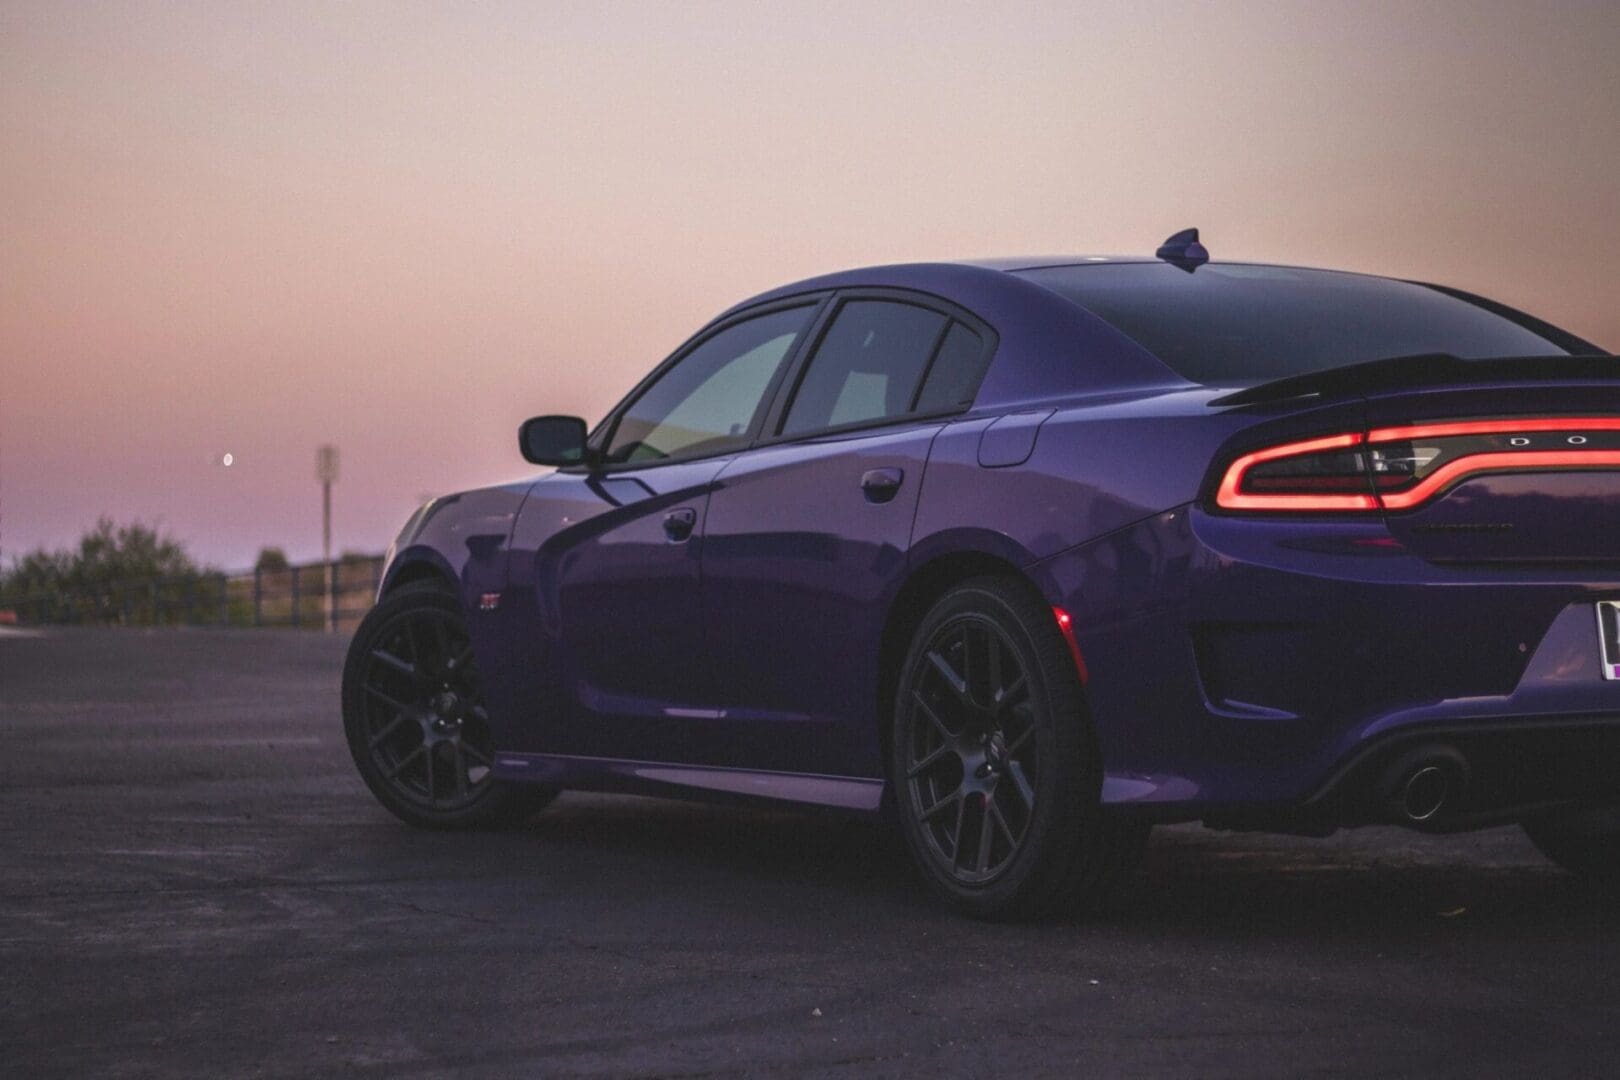 A purple car is parked on the side of the road.